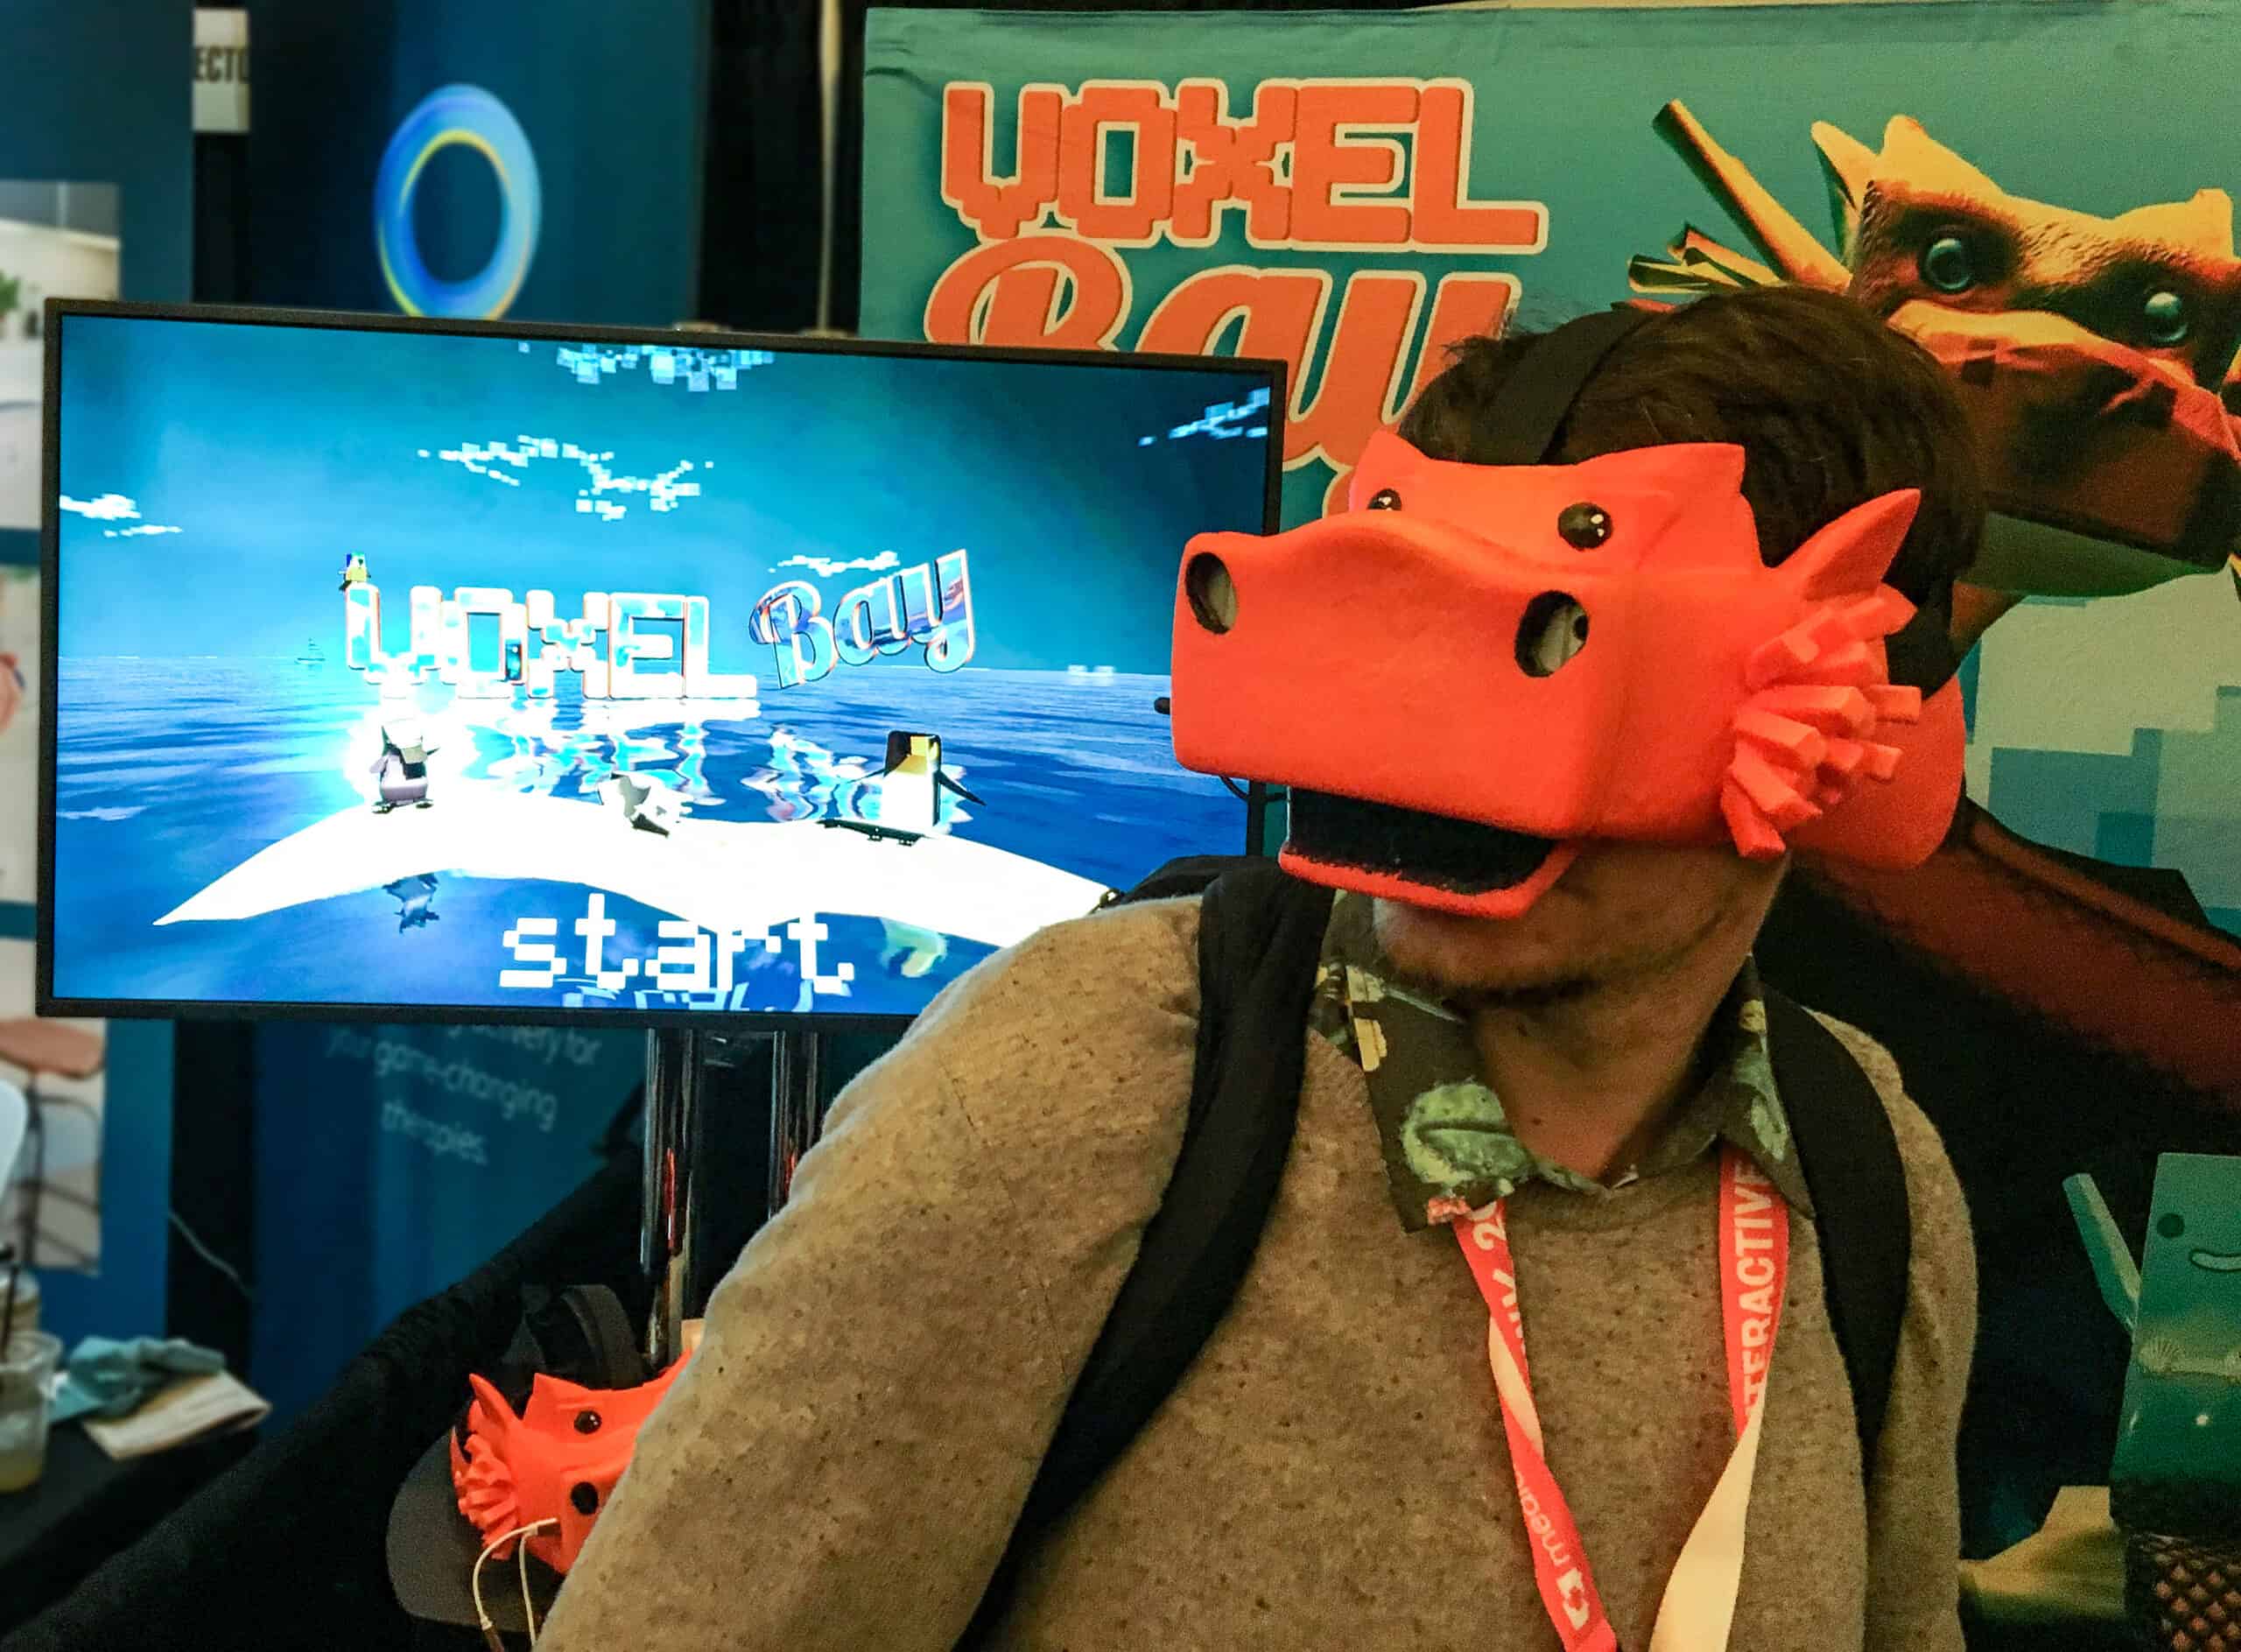 https://littleseed.io/wp-content/uploads/2021/11/LittleSeed-Voyager-VoxelBay_Virtual-Reality-VR-Headset-SXSW-2-scaled.jpg